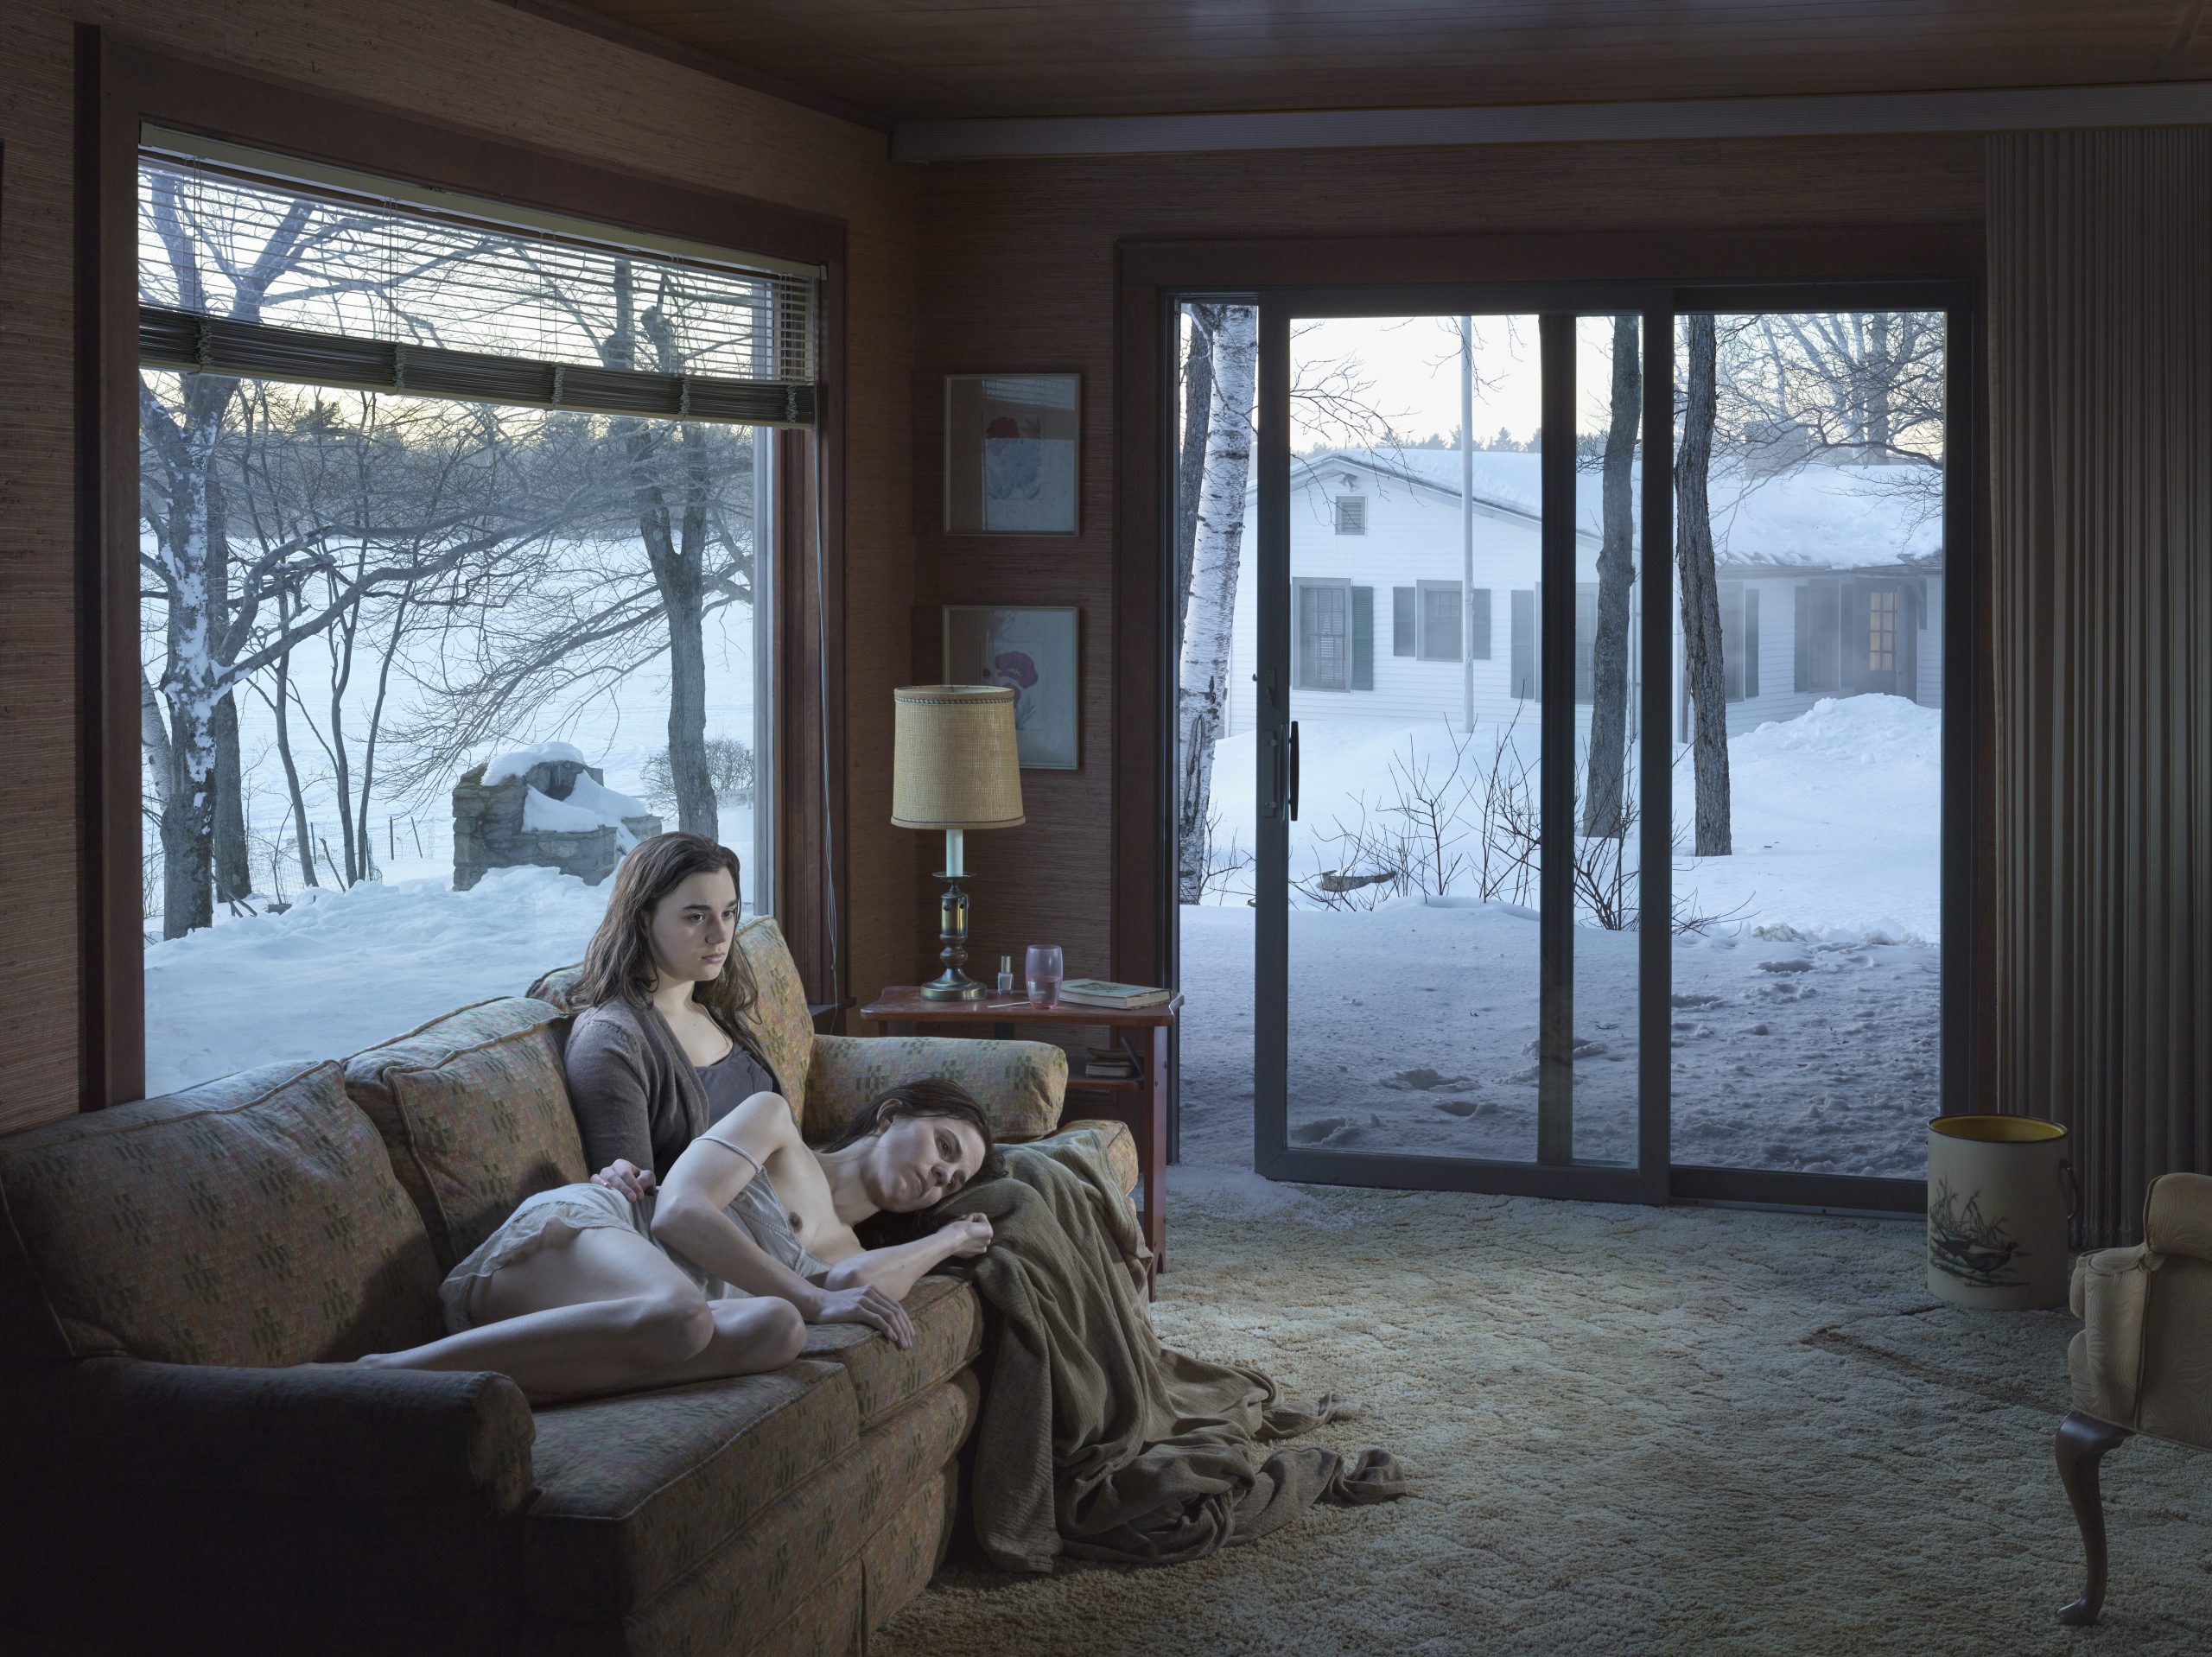 GREGORY CREWDSON, Mother and Daughter, 2014, digital pigment print, image size_ 37.5 x 50 in. © Gregory Crewdson